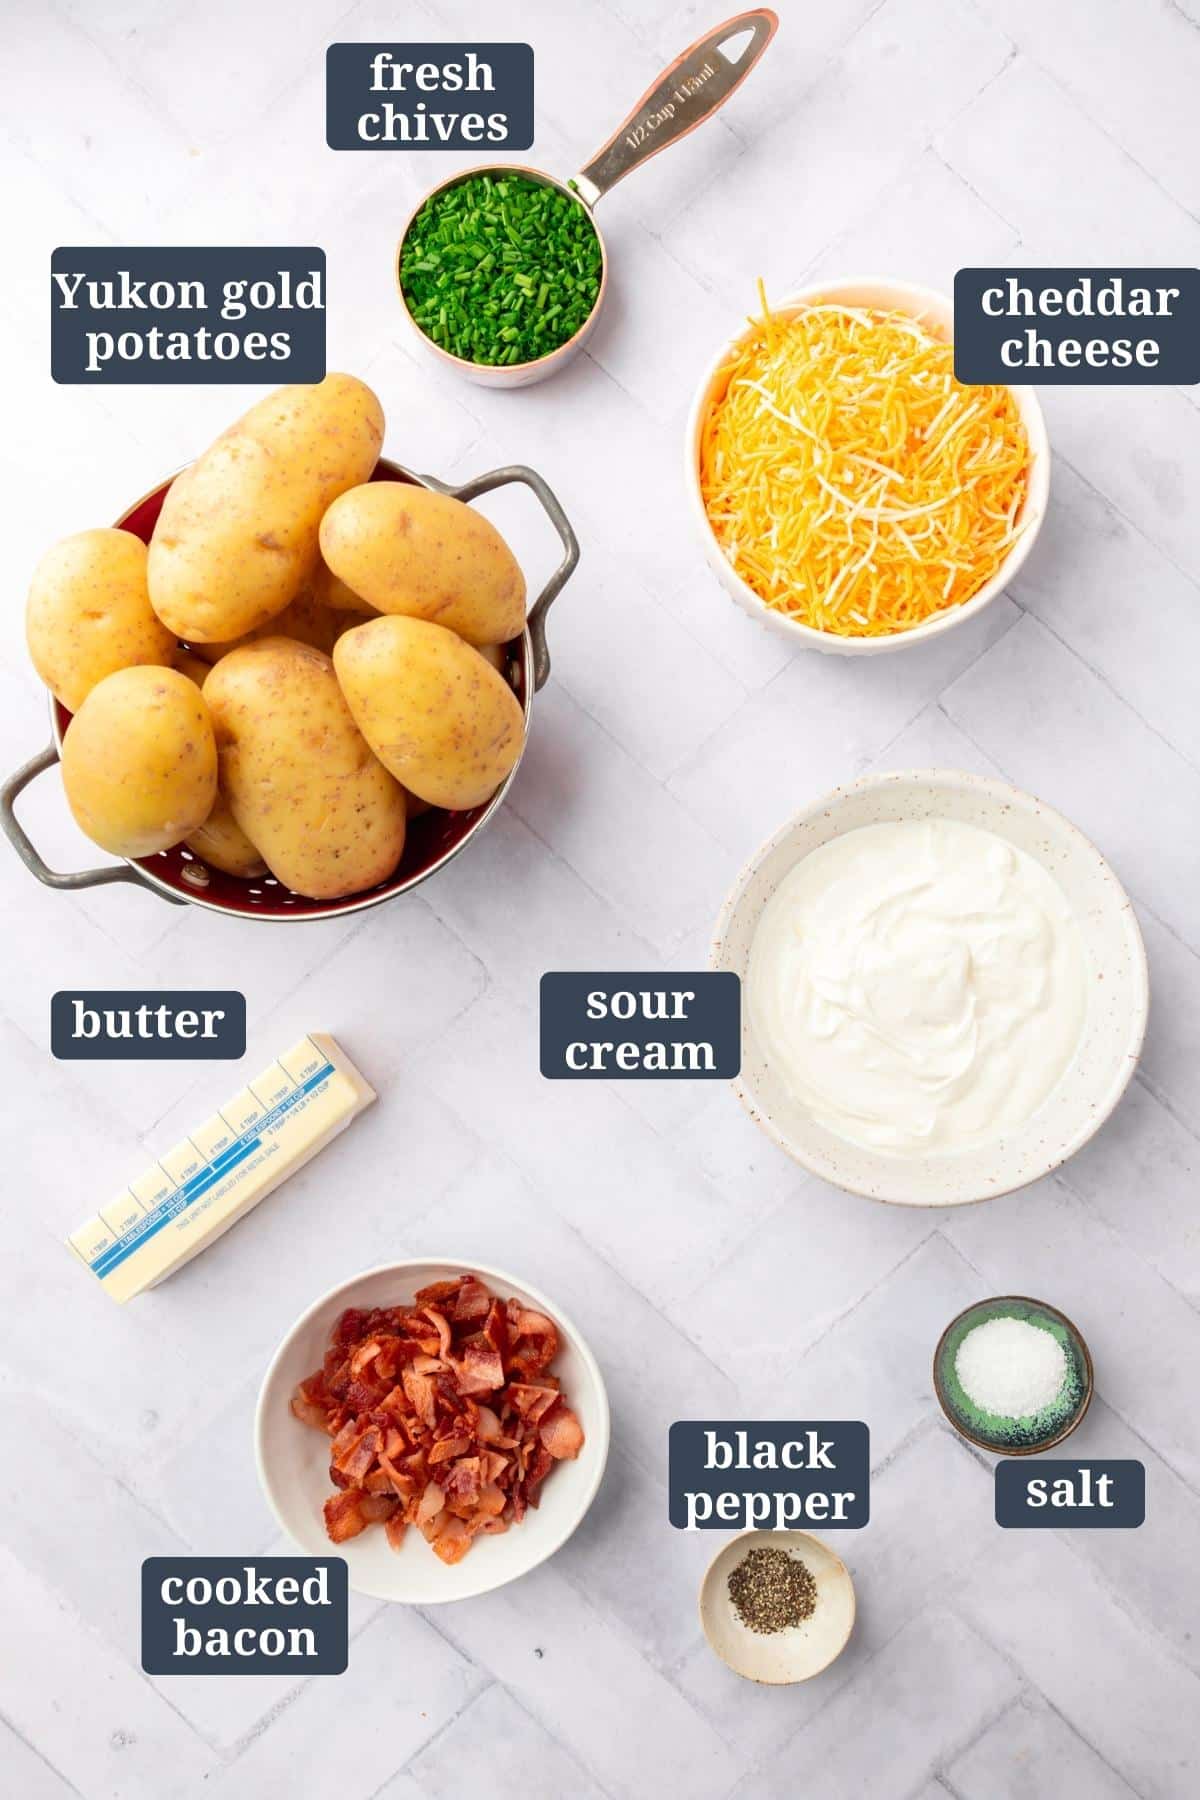 Ingredients in bowls on a gray chevron table to make twice baked mashed potatoes, including yukon gold potatoes, chives, cheddar cheese, butter, sour cream, cooked bacon bites, black pepper and salt with text overlays over each ingredient.